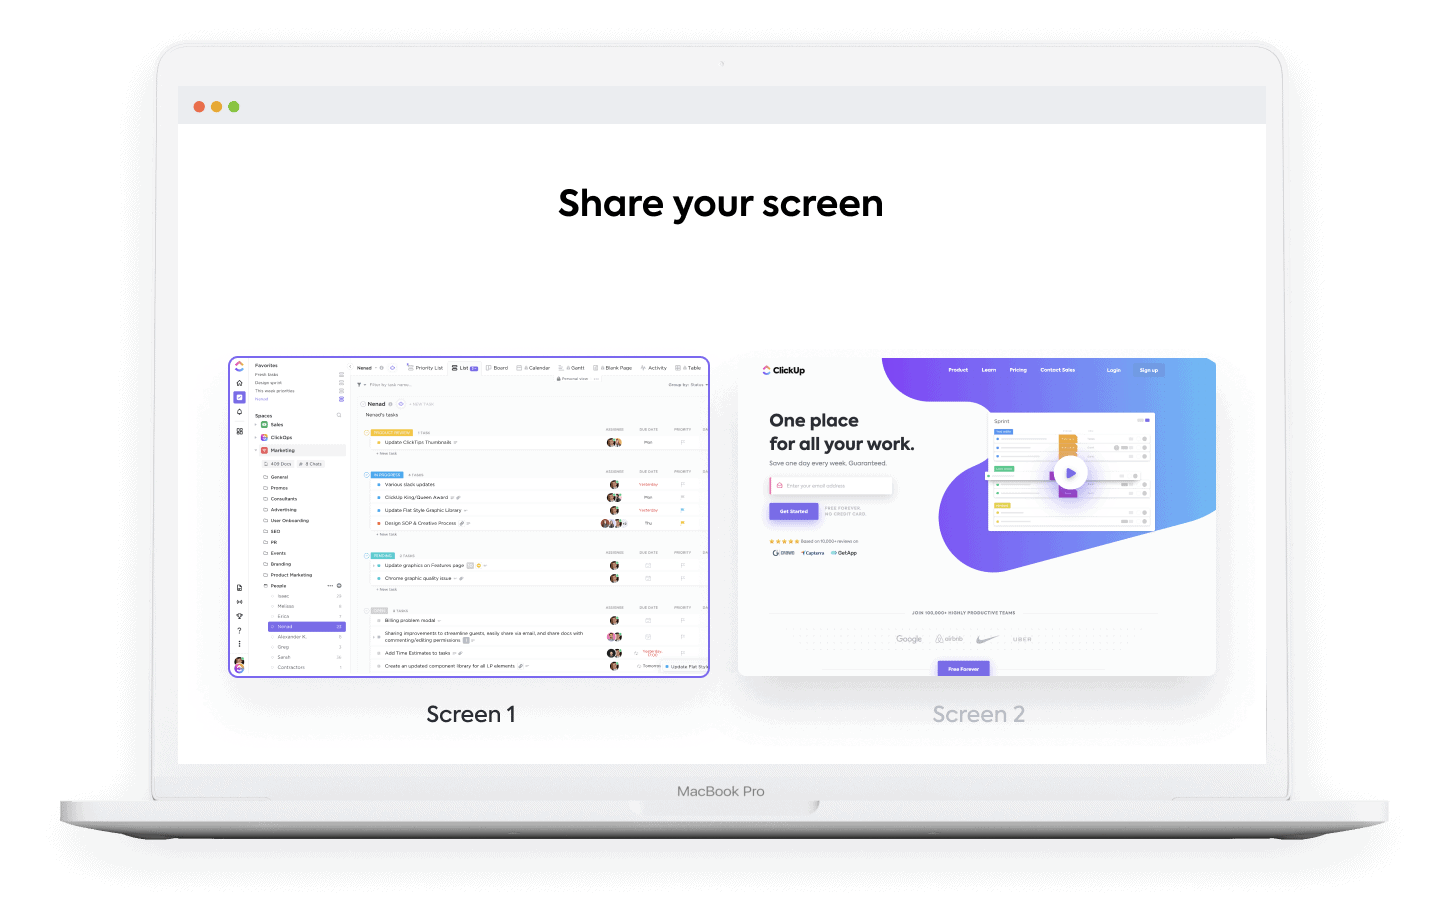 Record anything on your screen.